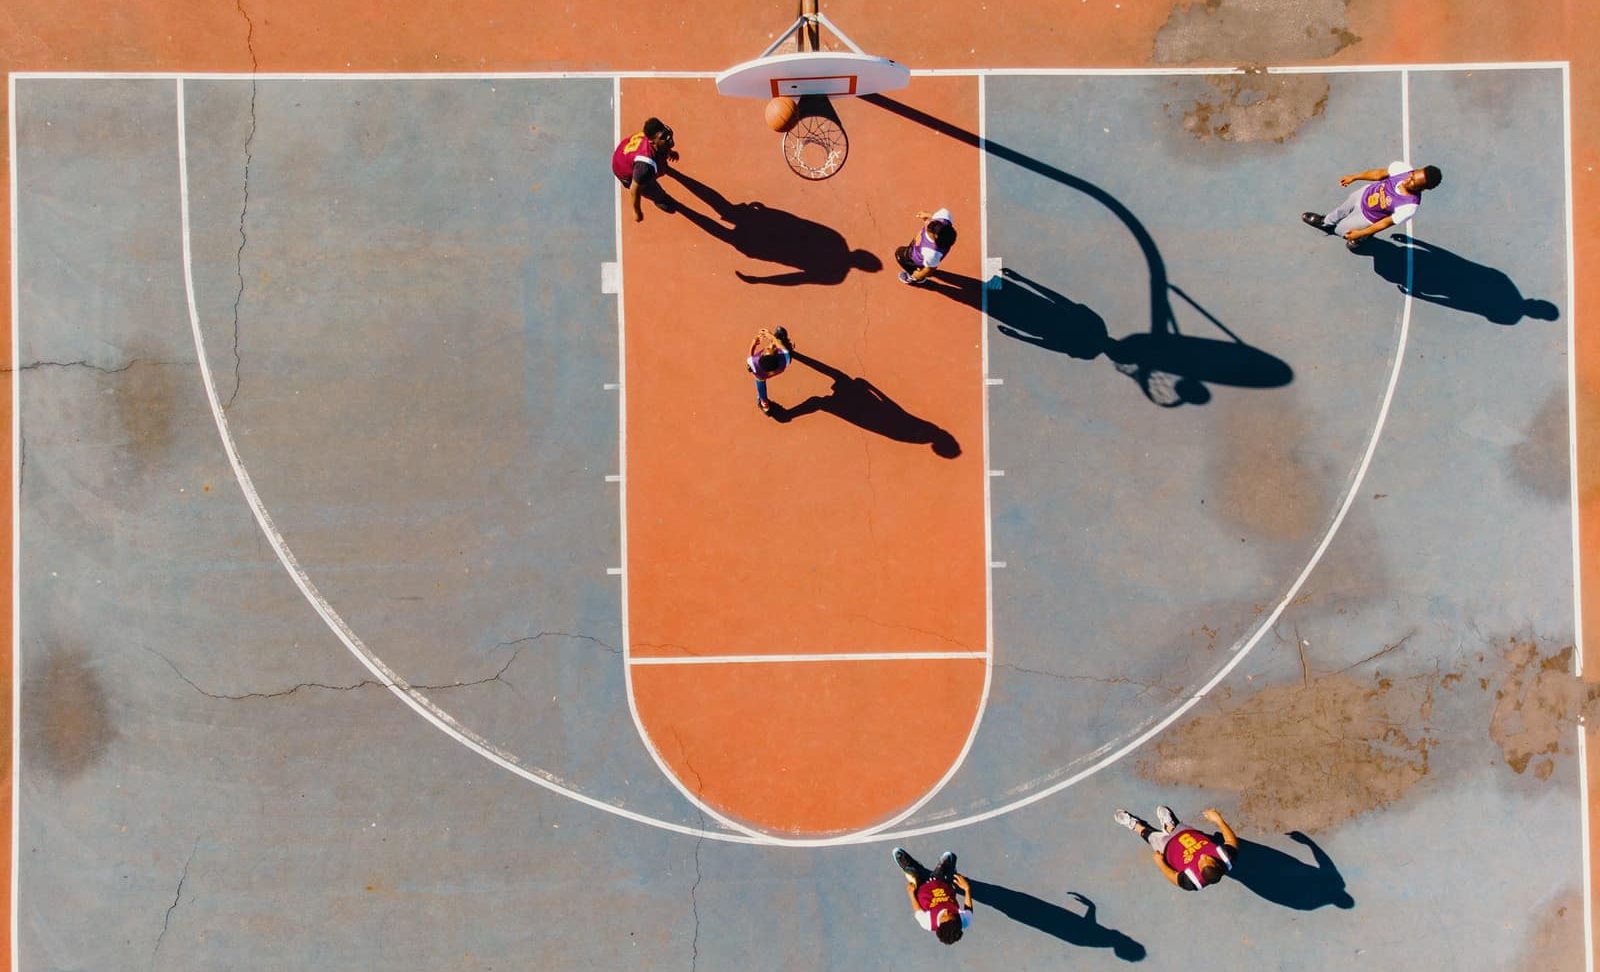 What does a bonus mean in basketball (bonus situation/penalty situation)? aerial photography of men playing basketball